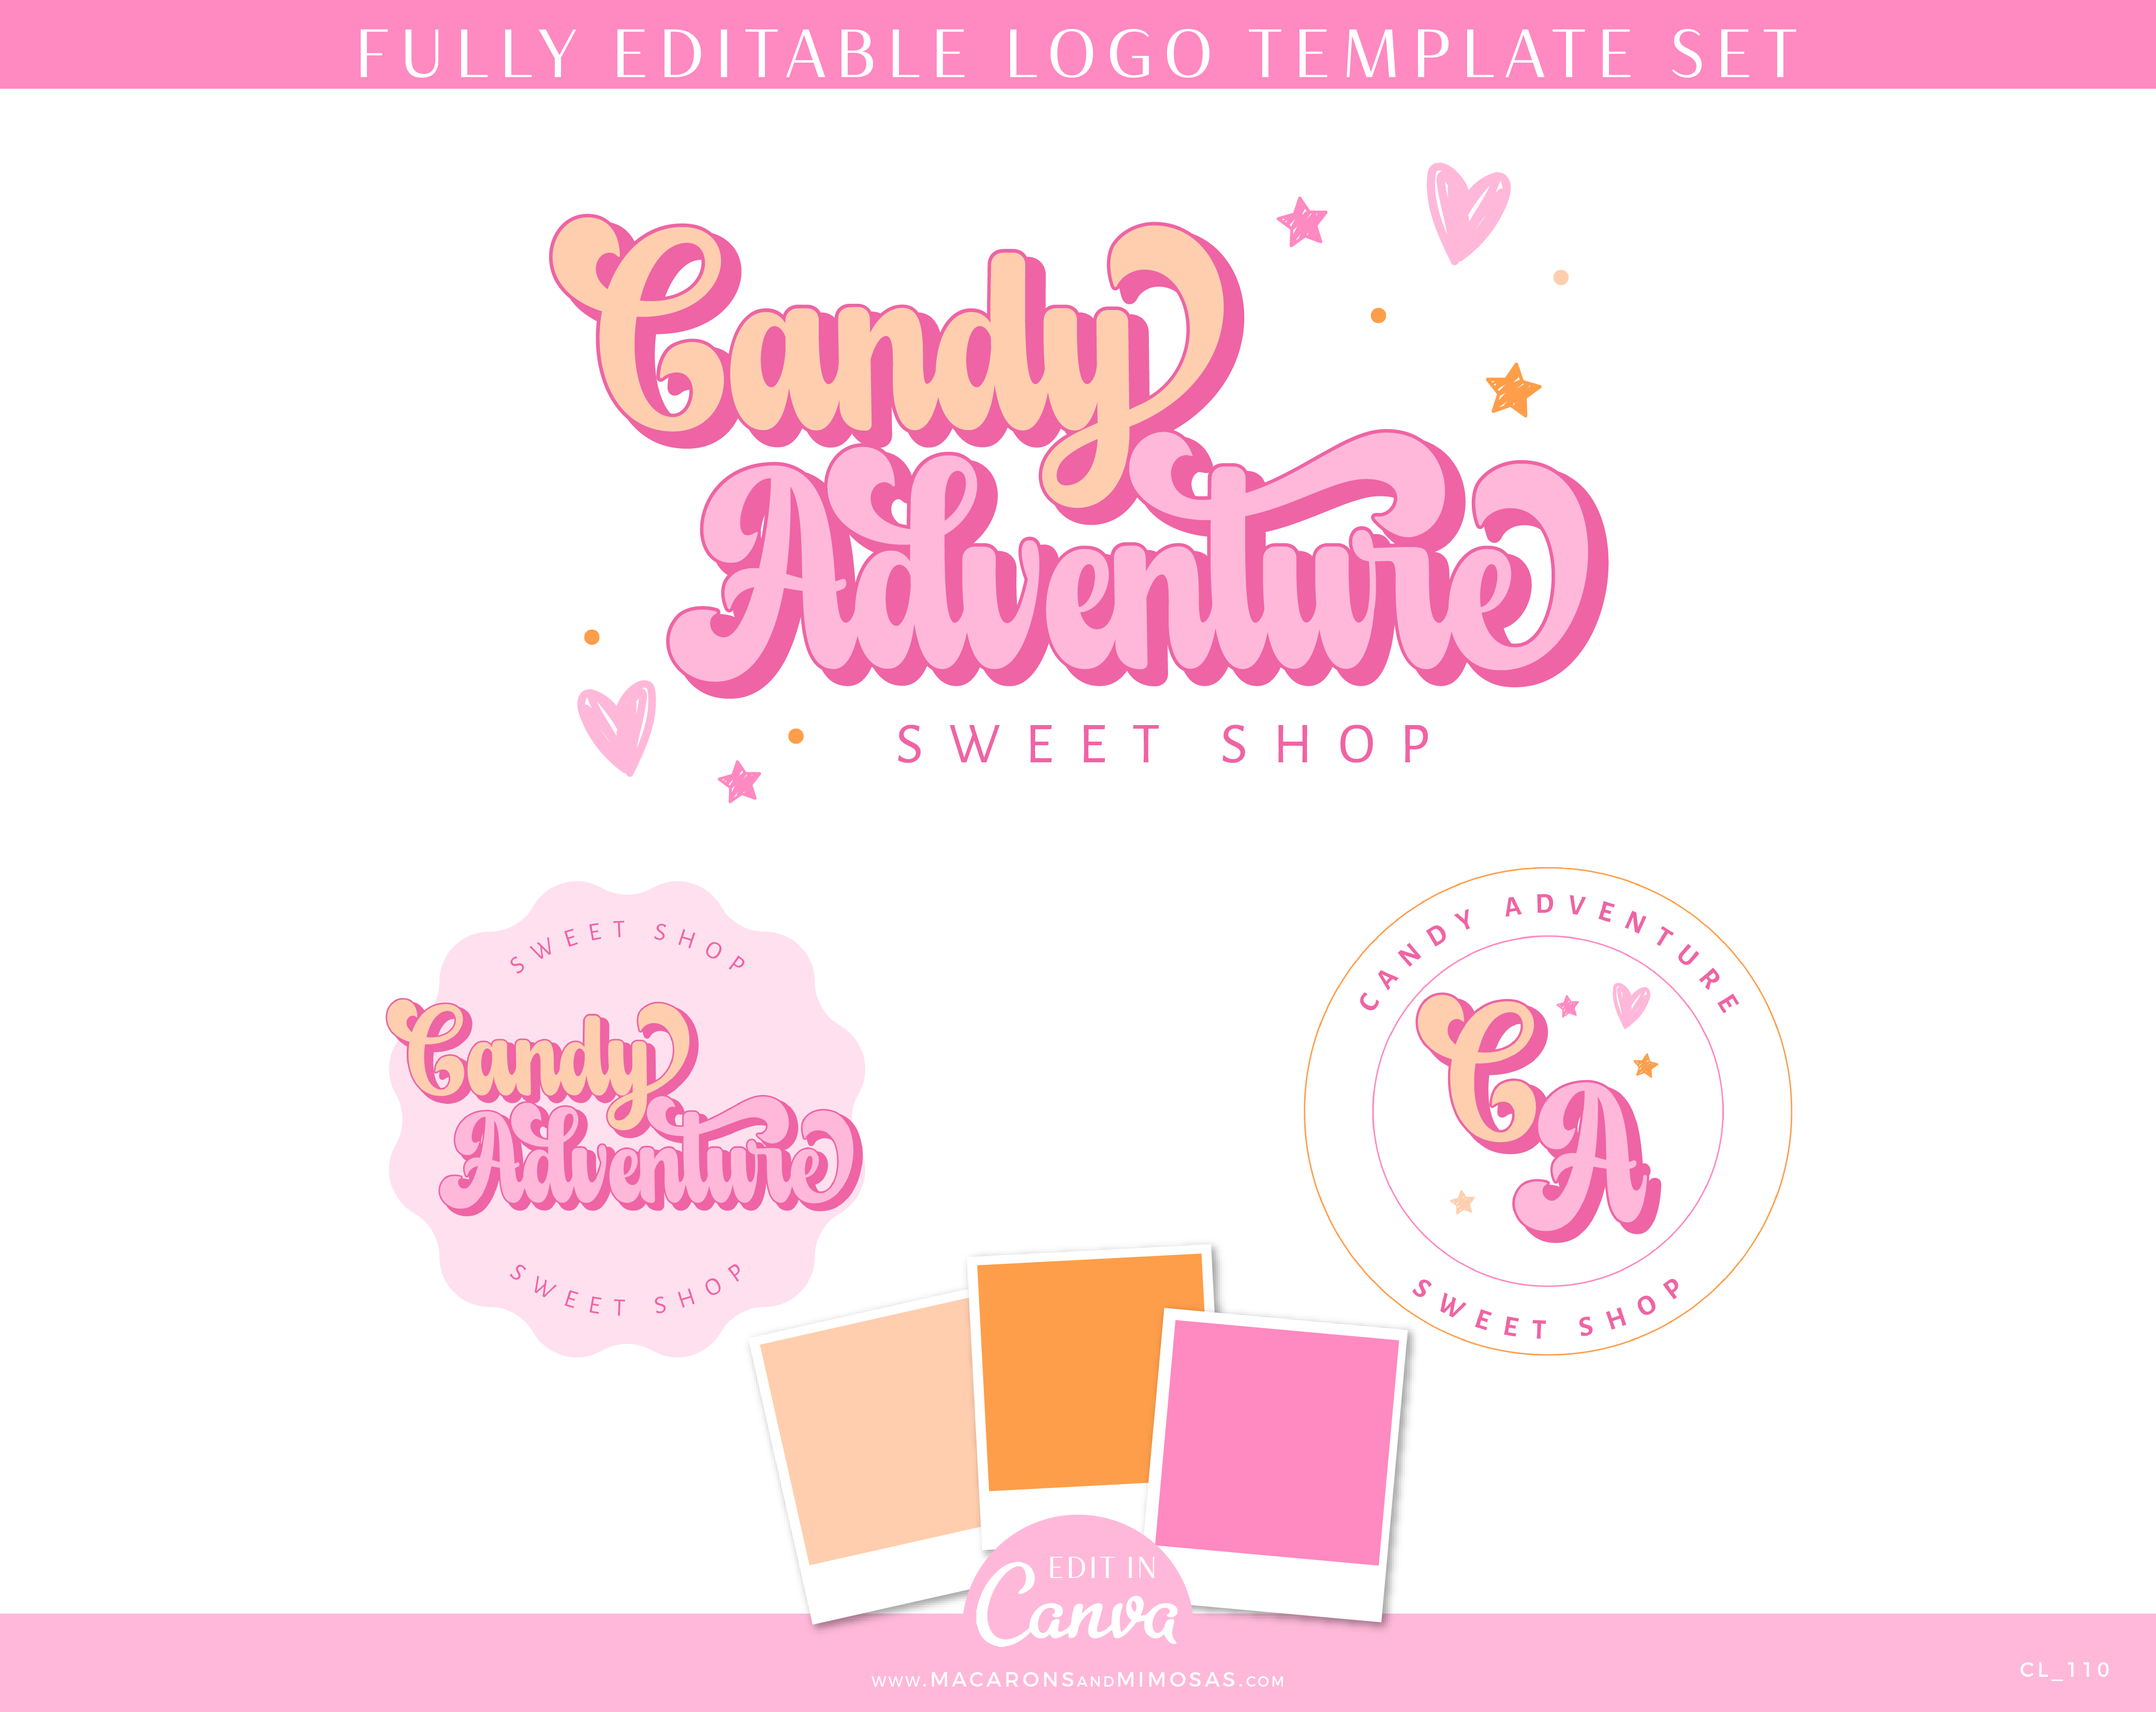 Pink retro logo Template edit in Canva. Cute bubble font for logo design DIY a colorful logo Brand Board template for your small business.